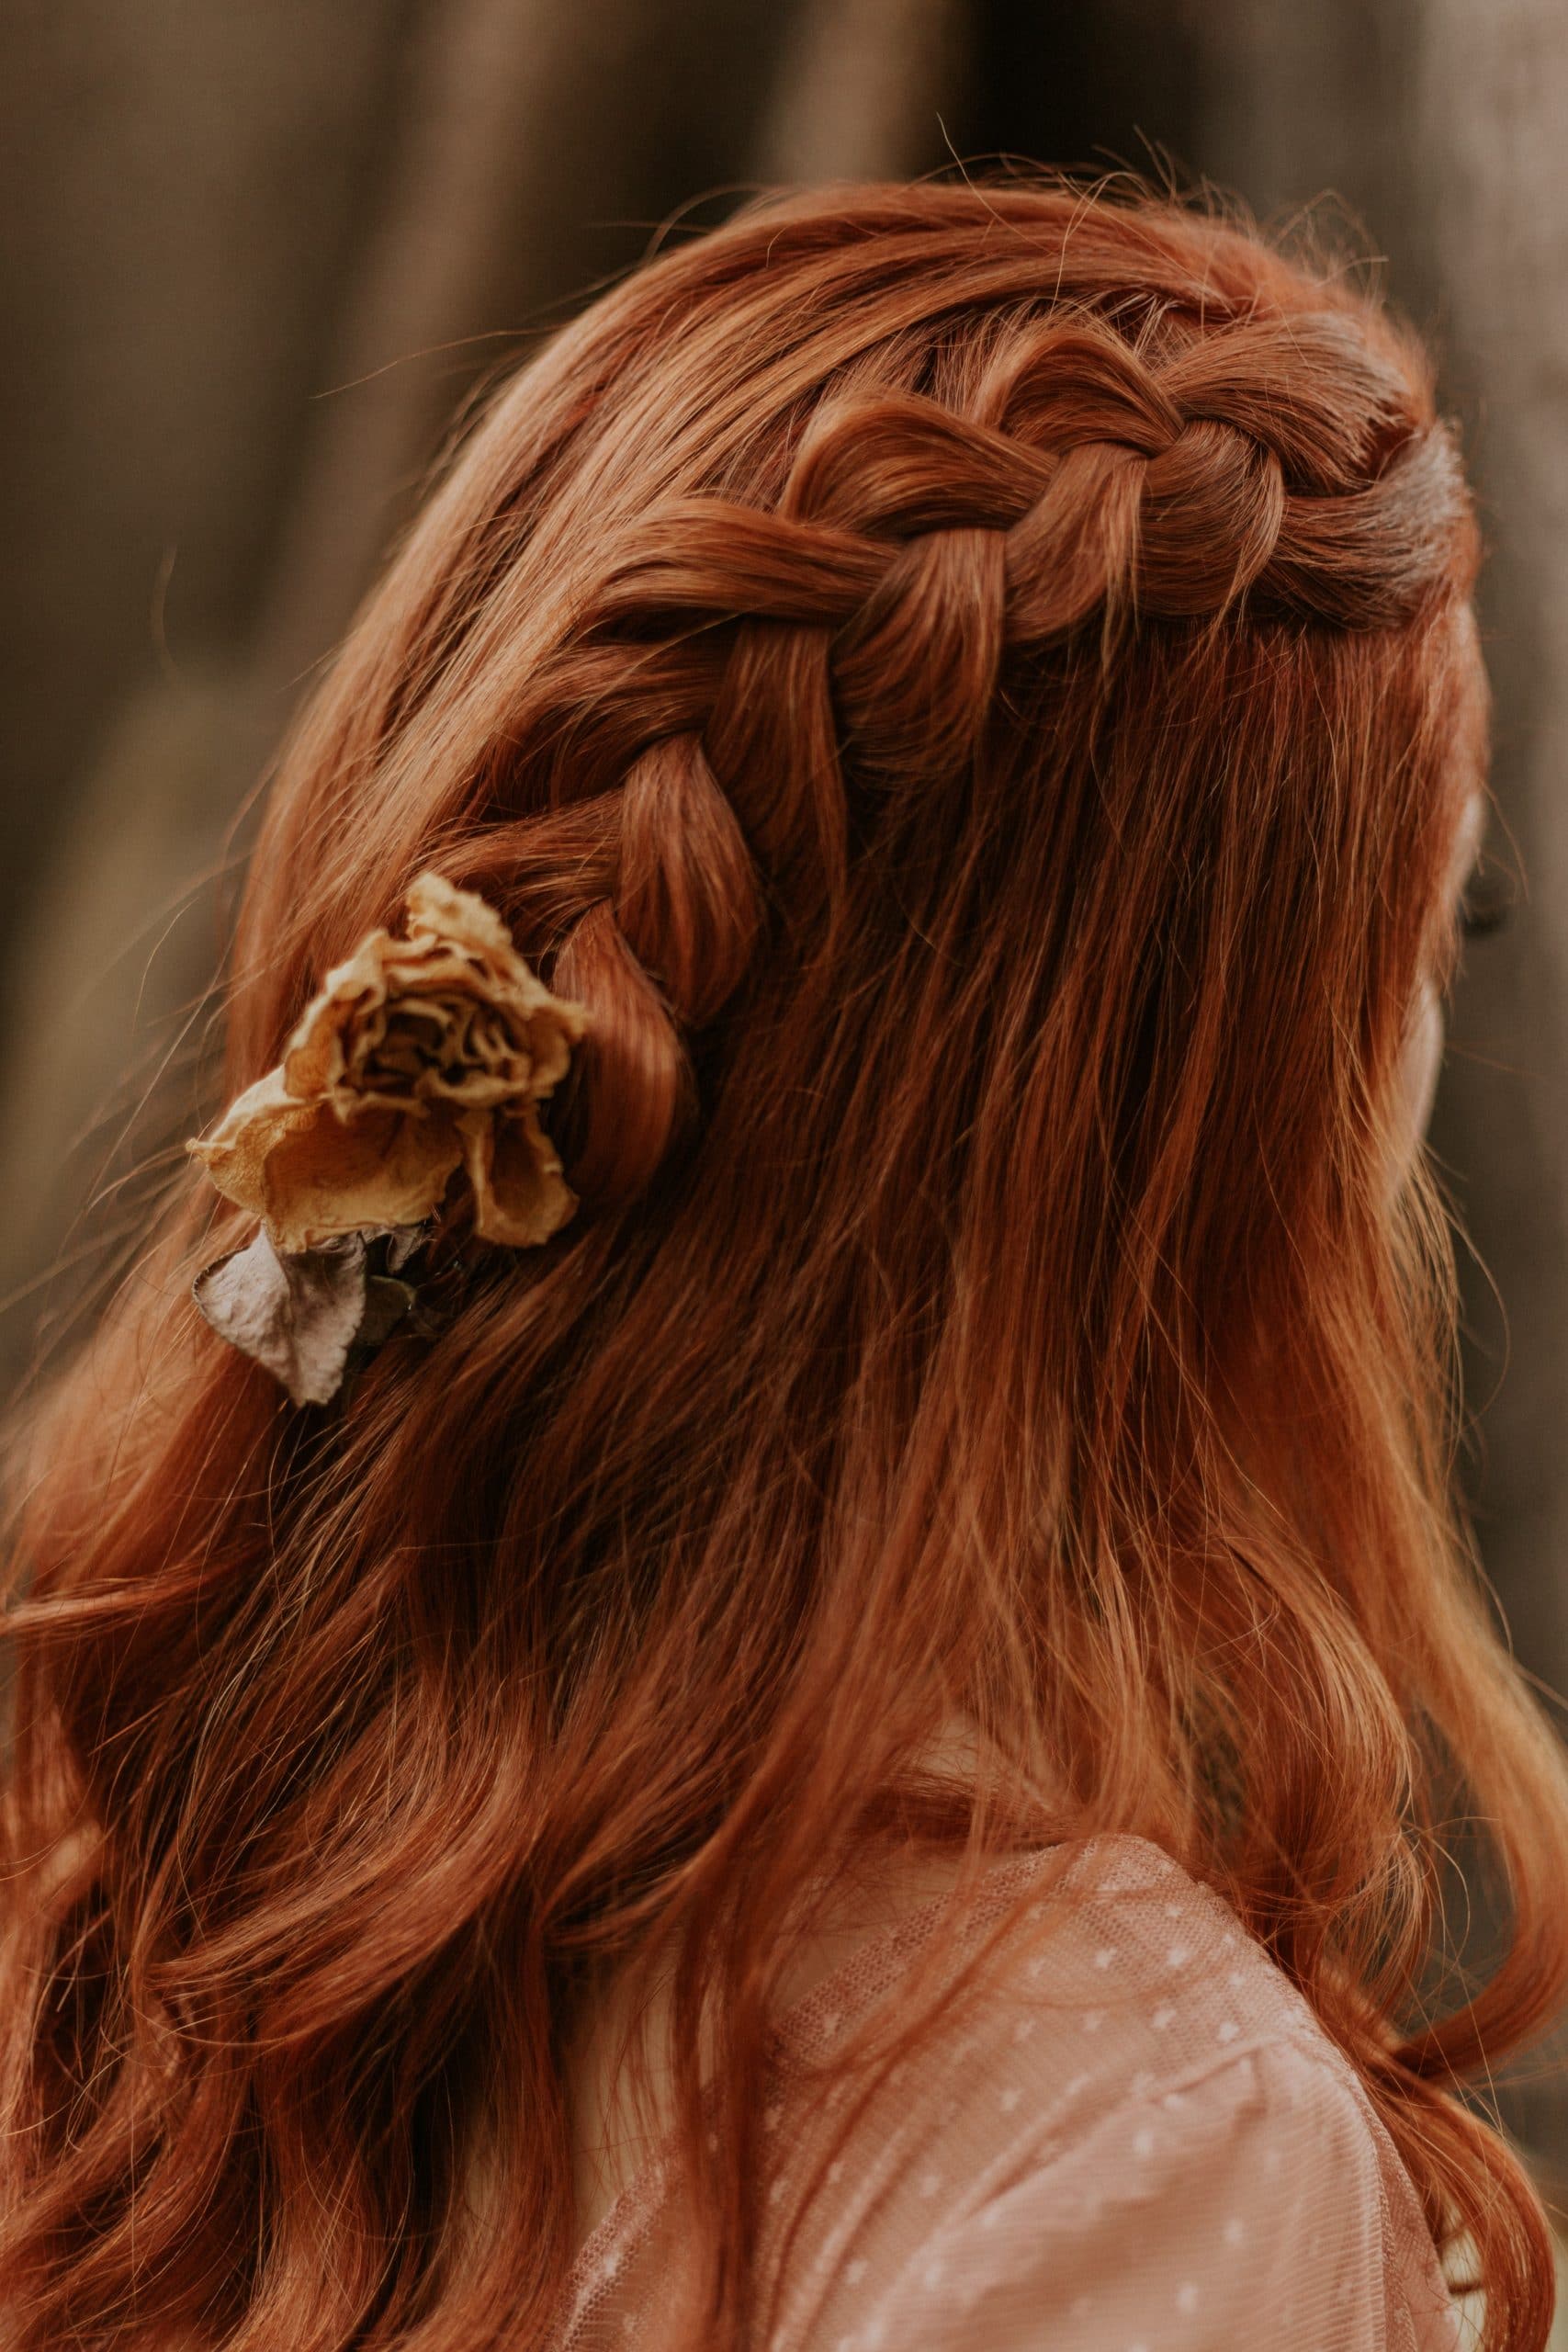 50+ Braided Hairstyles To Try Right Now : Small Bow Braid